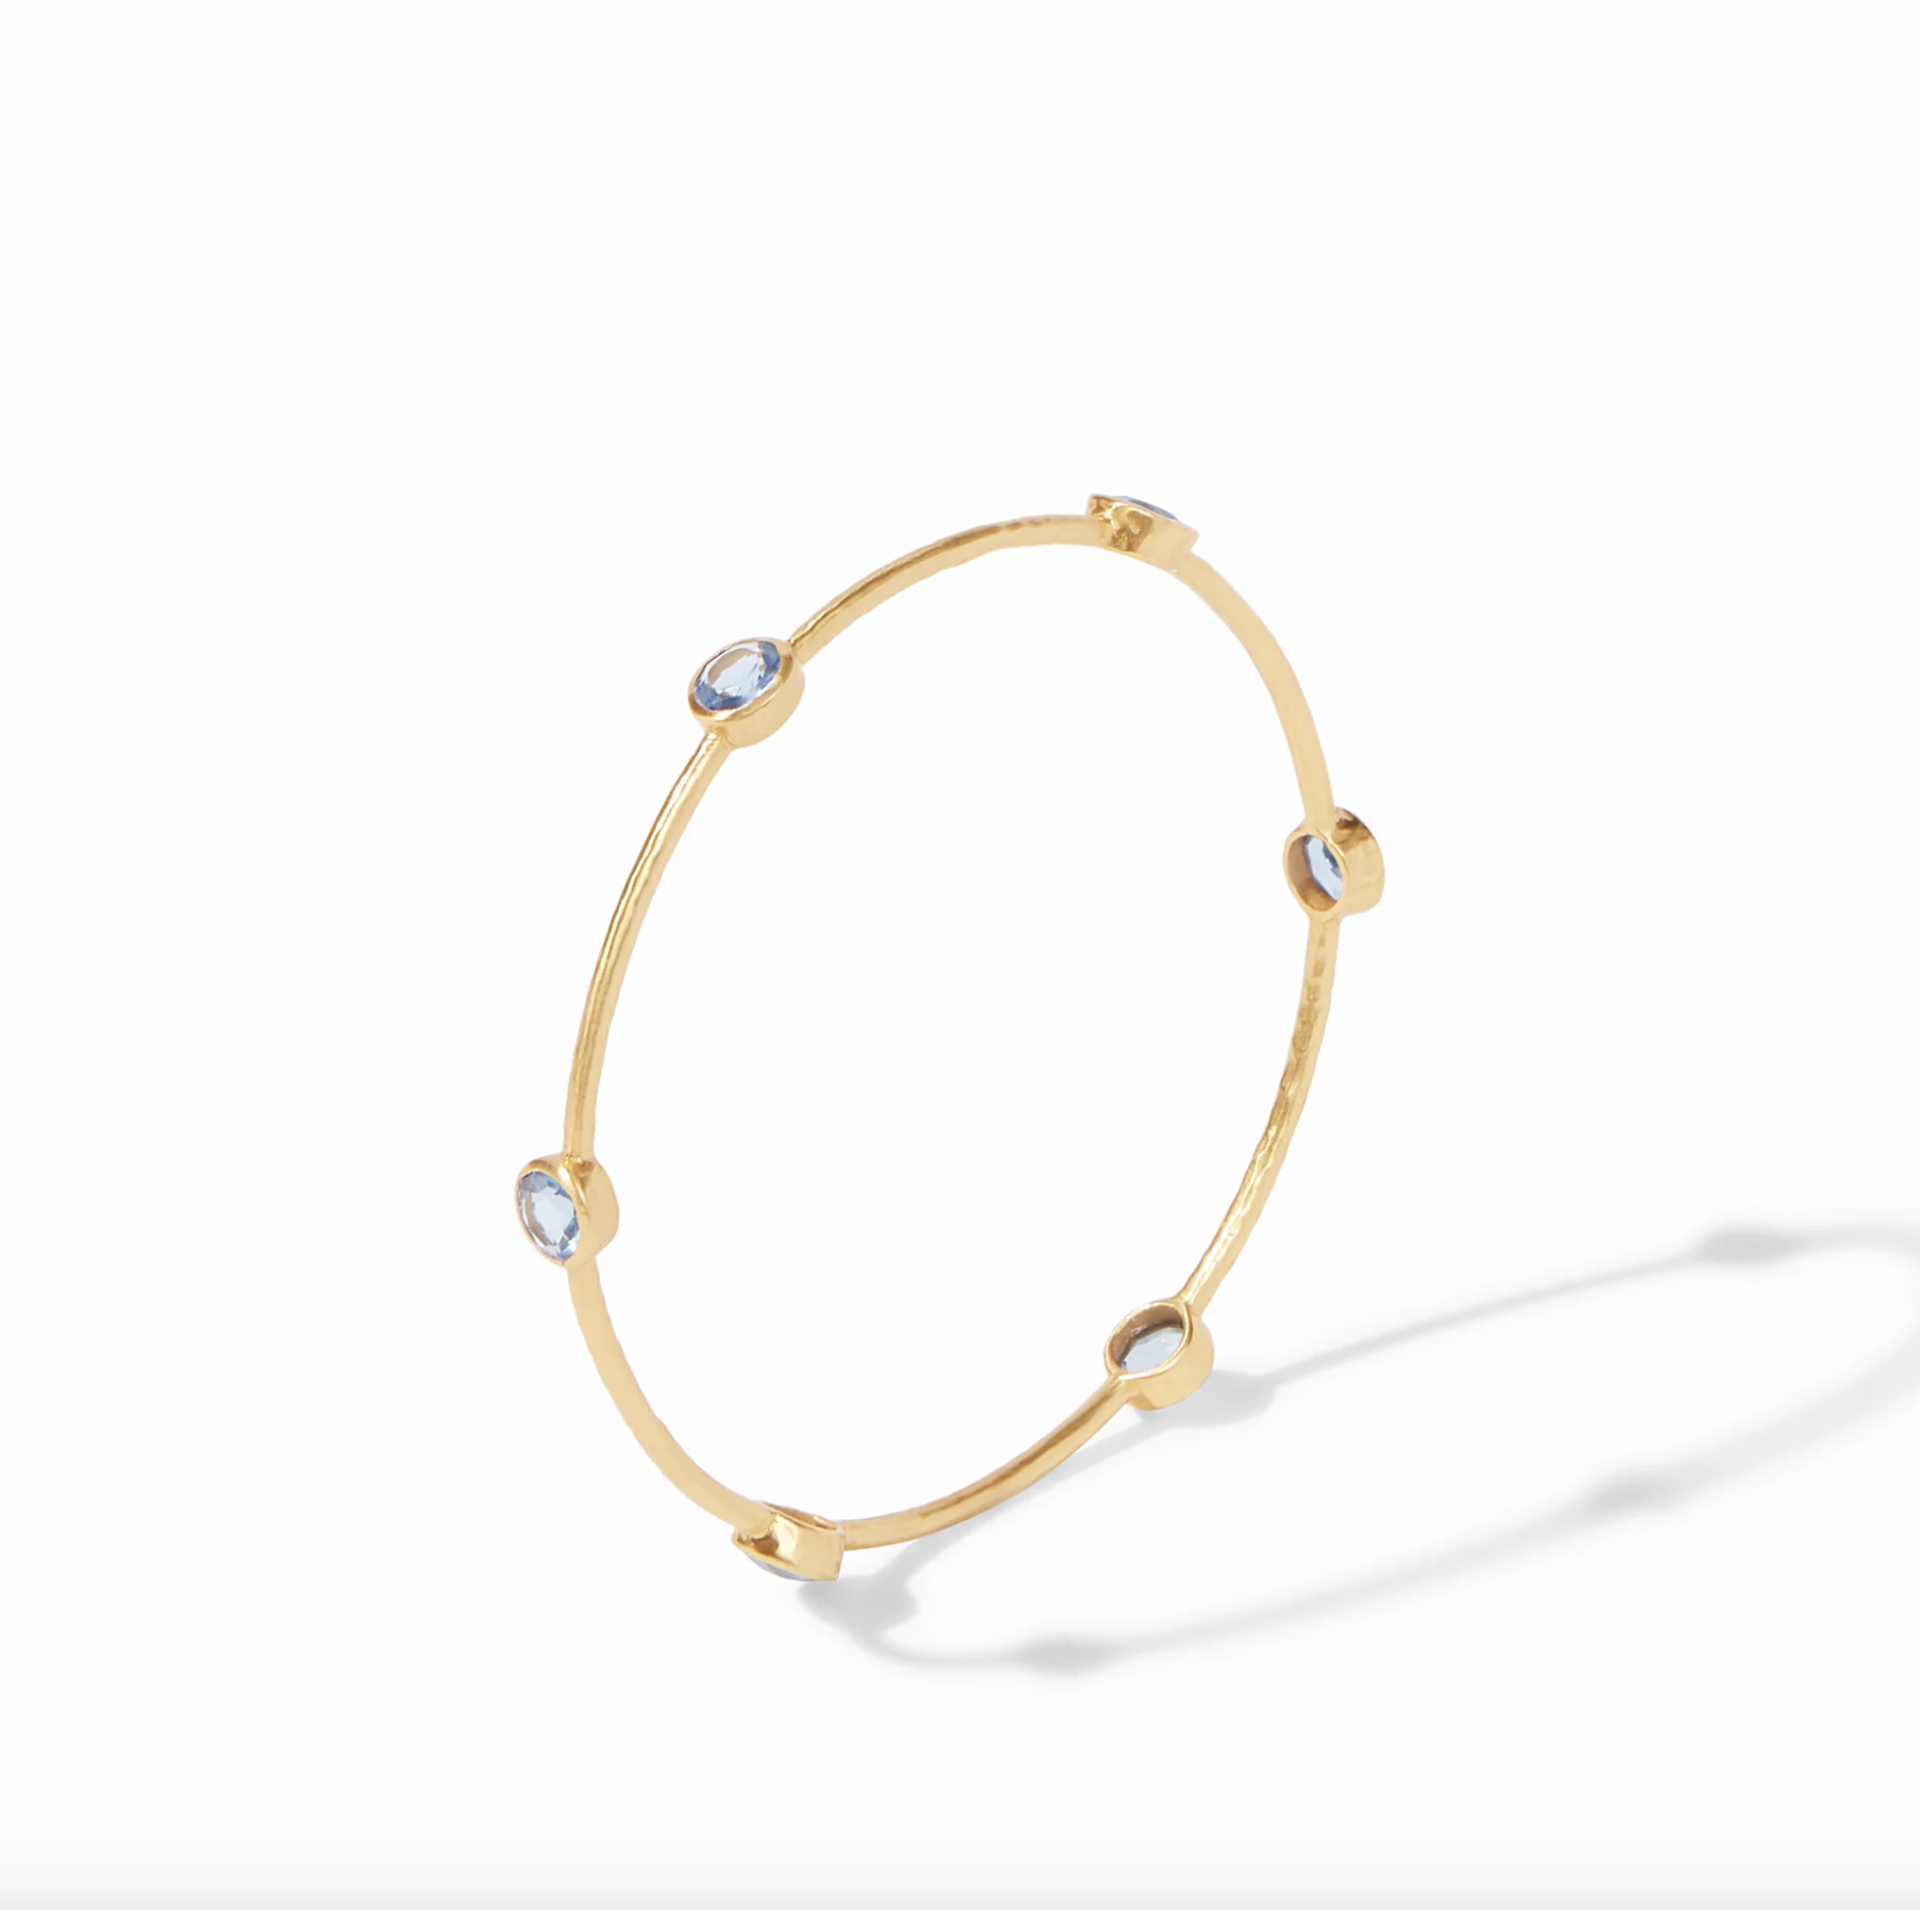 Milano Bangle - Chalcedony Blue by Julie Vos